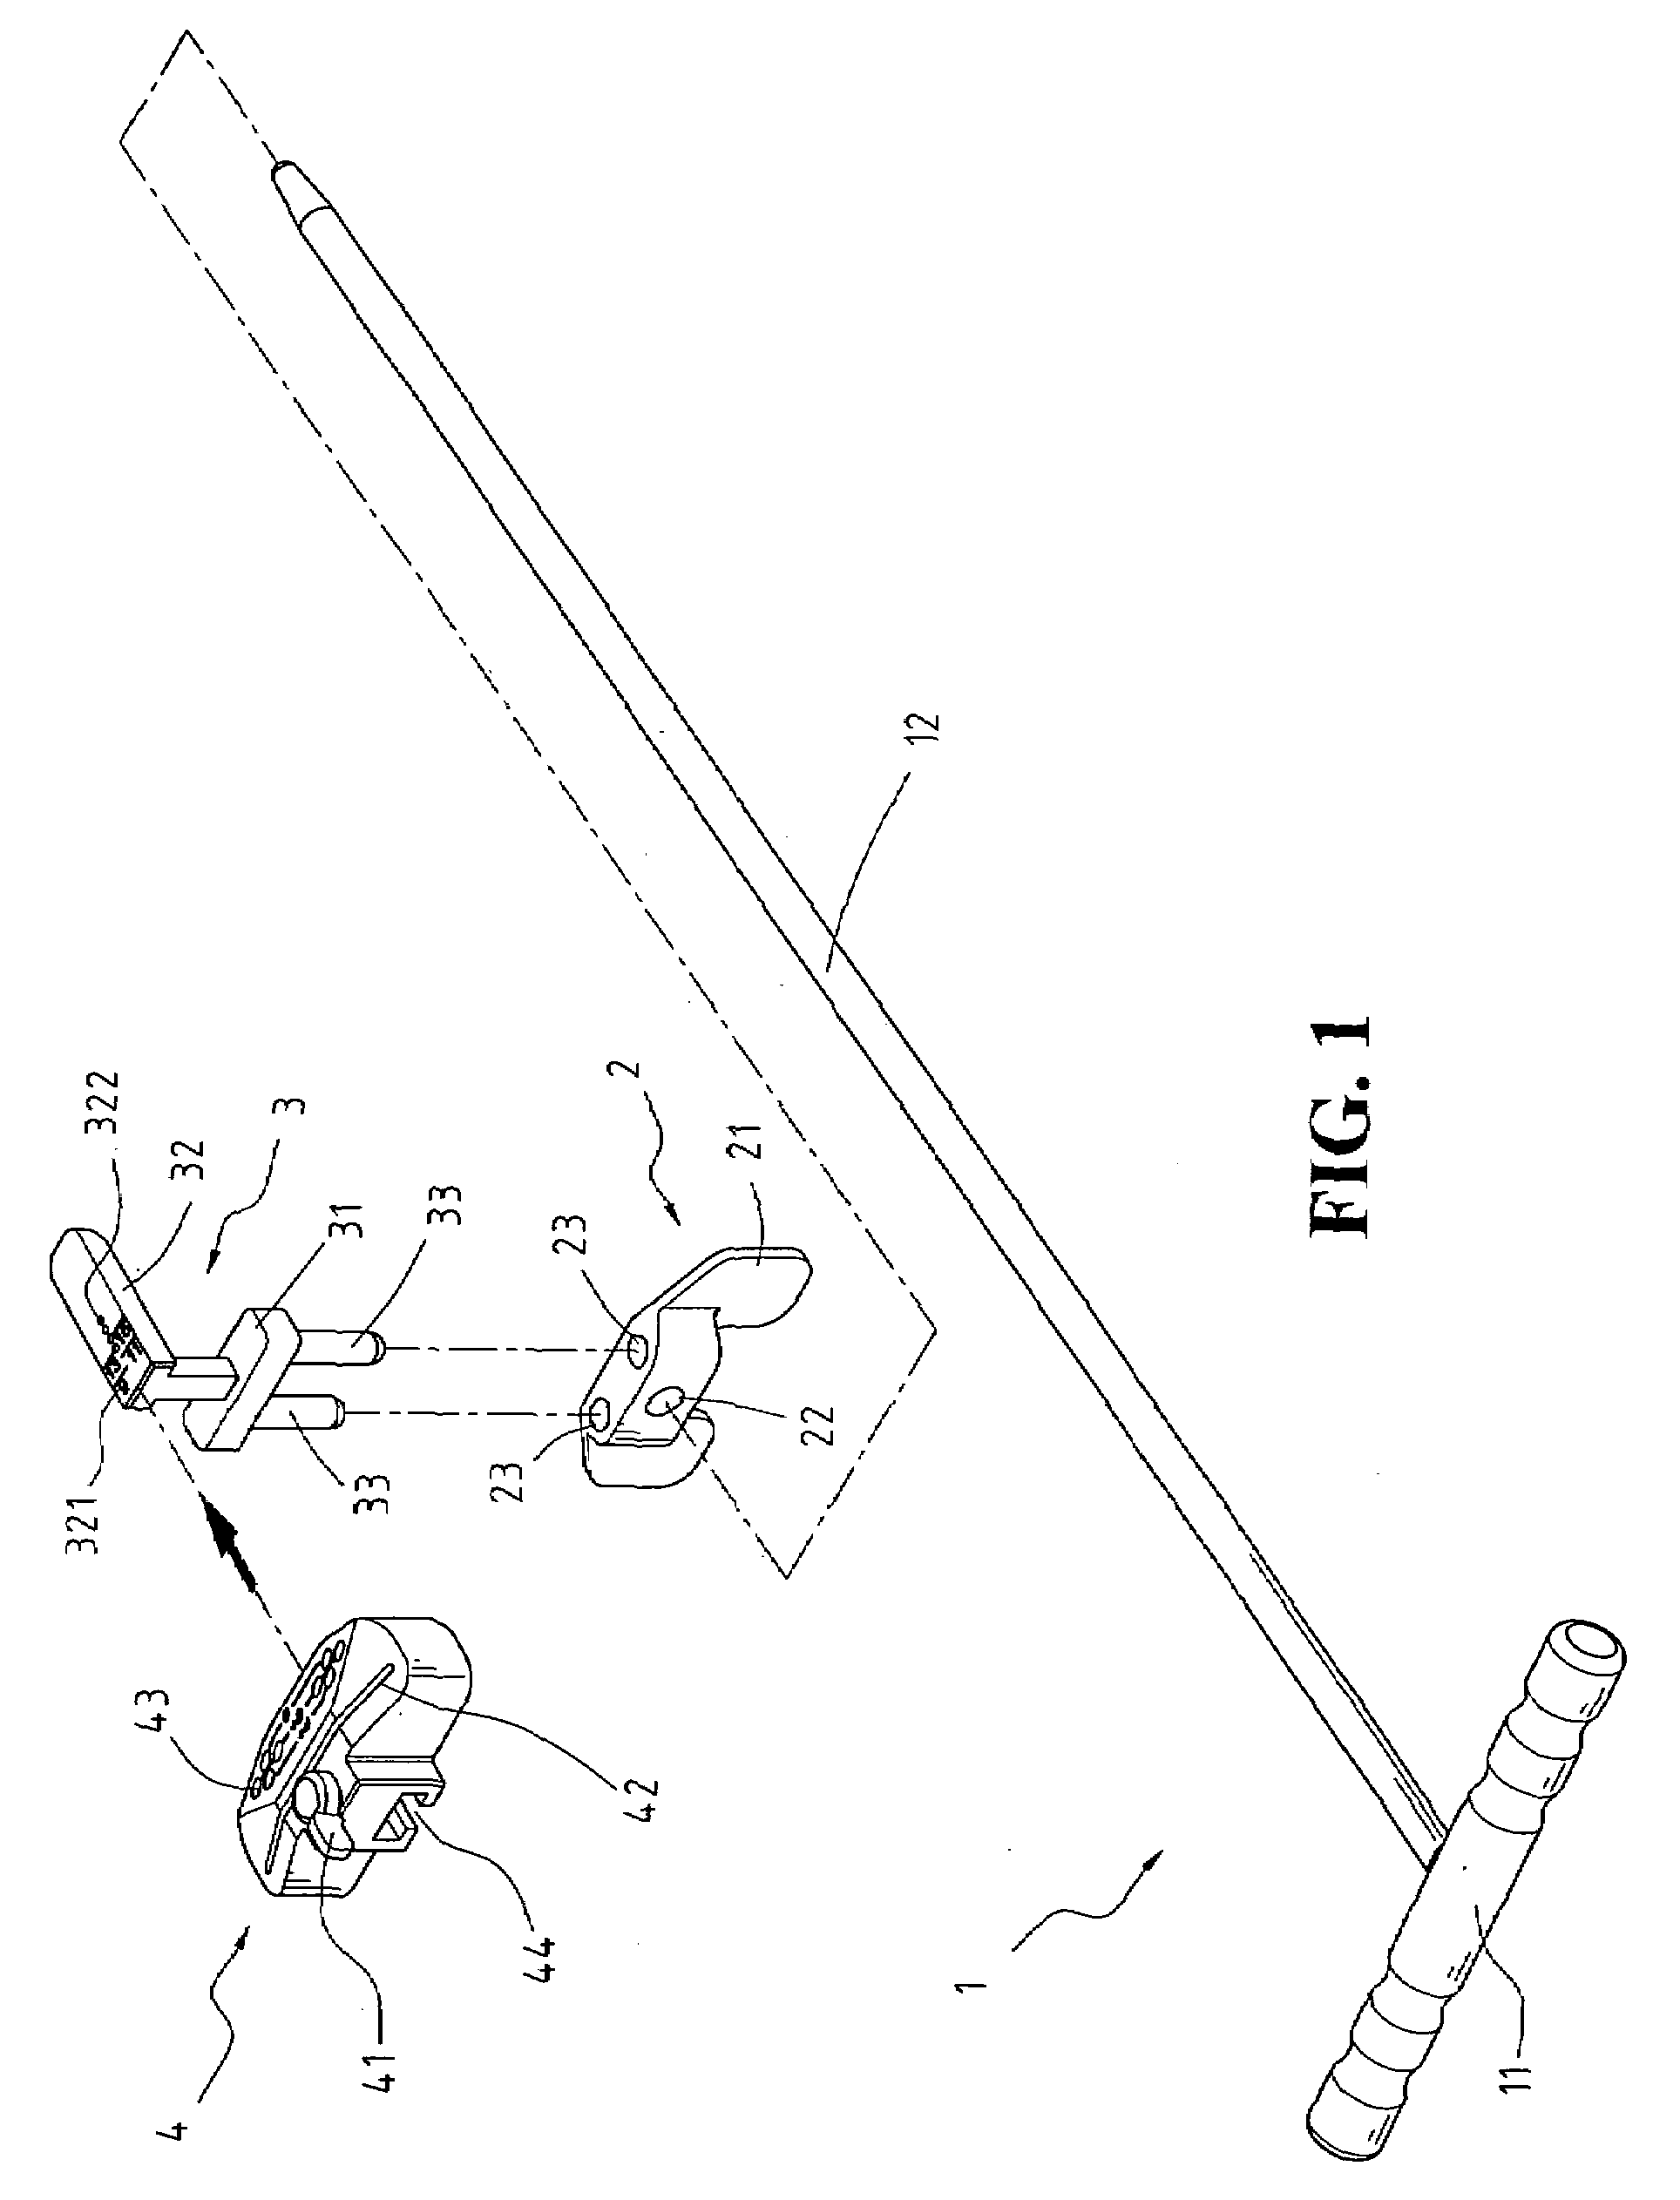 Surgical tool assembly for total knee arthroplasty